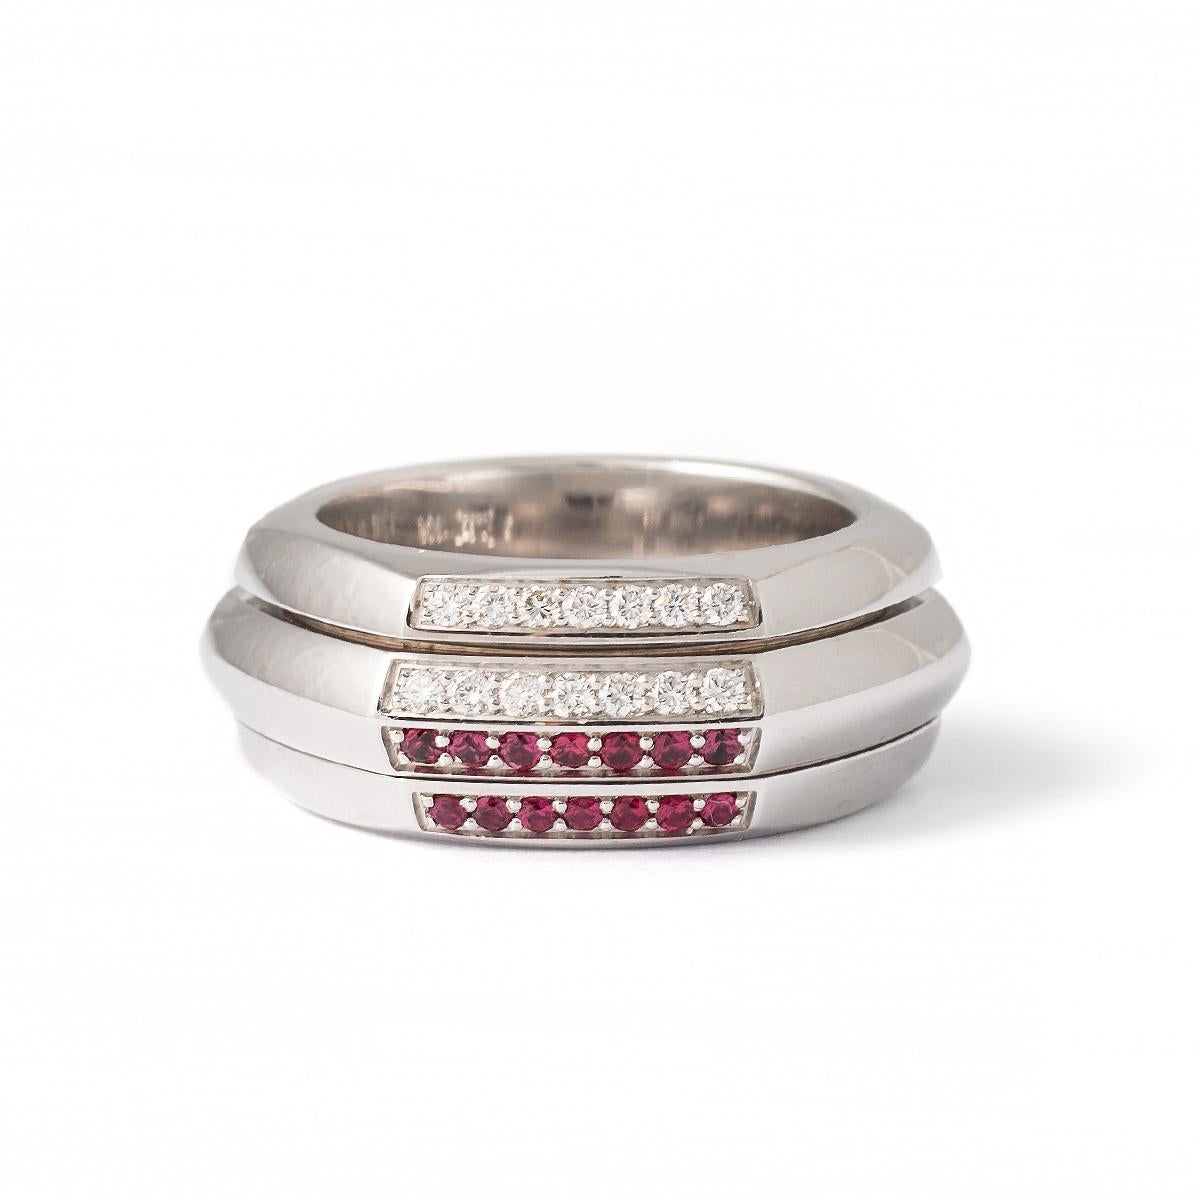 Piaget Possession Diamond and Ruby White Gold band Ring.
Numbered A73335.
Signed Piaget.
Date 1998.
Ring size: 55.